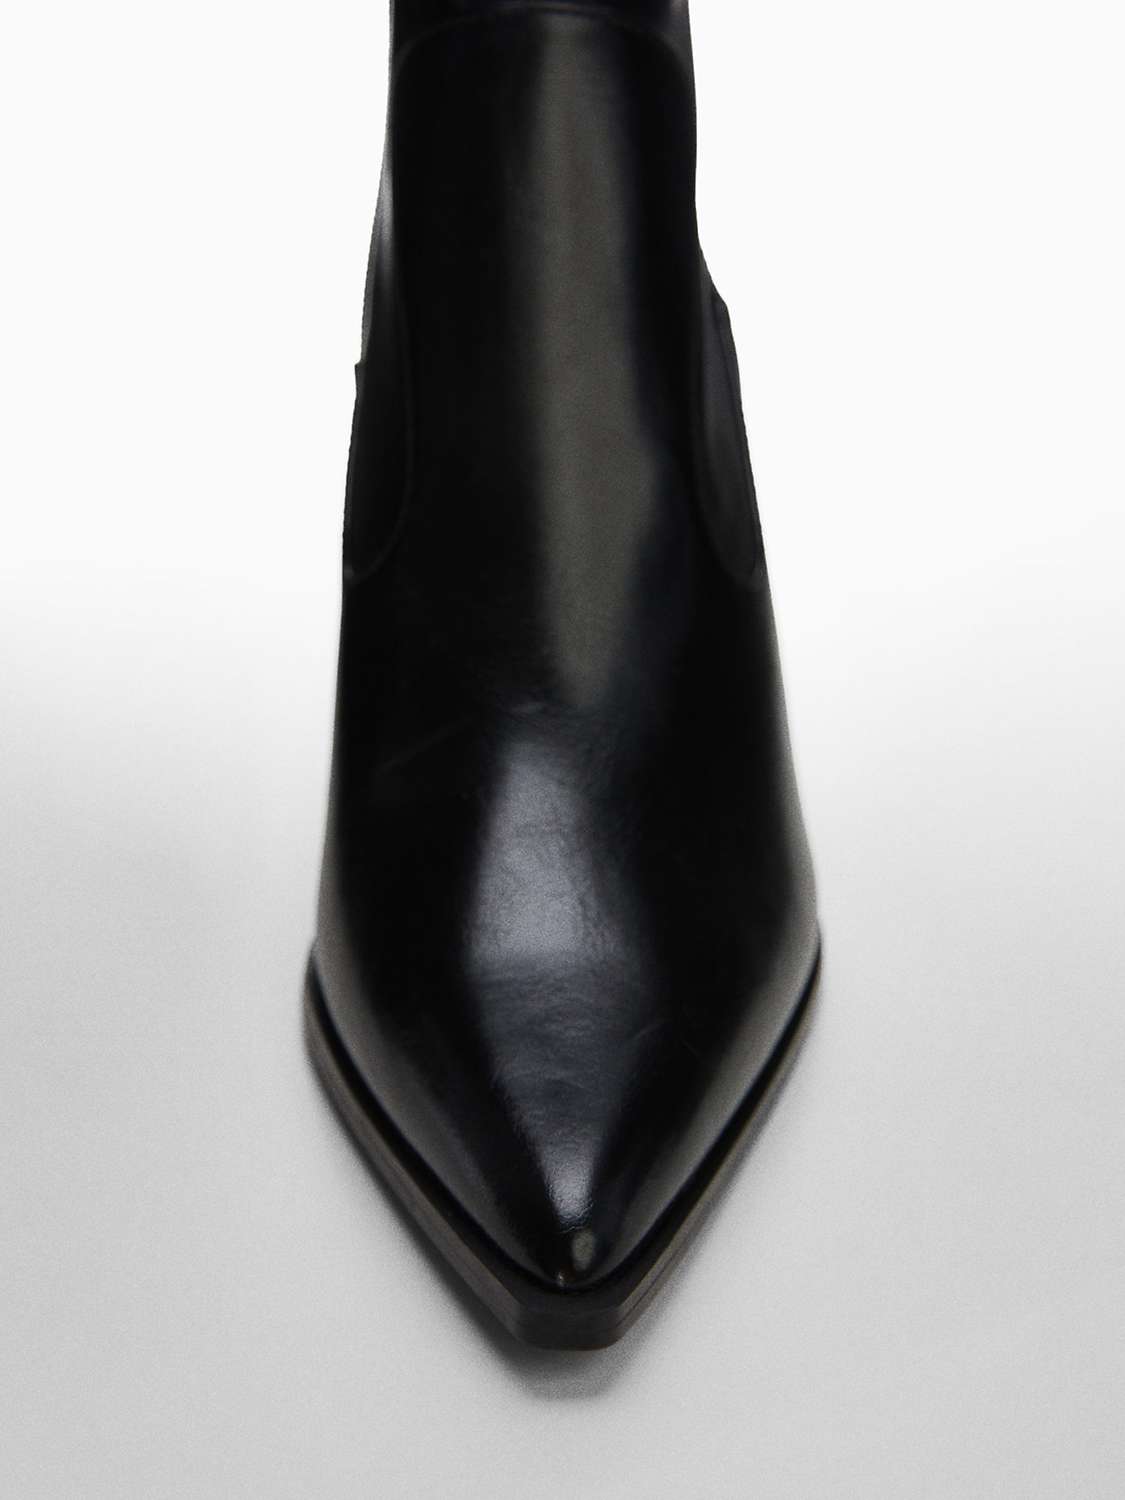 Buy Mango Vora Pointy Faux Leather Ankle Boots, Black Online at johnlewis.com